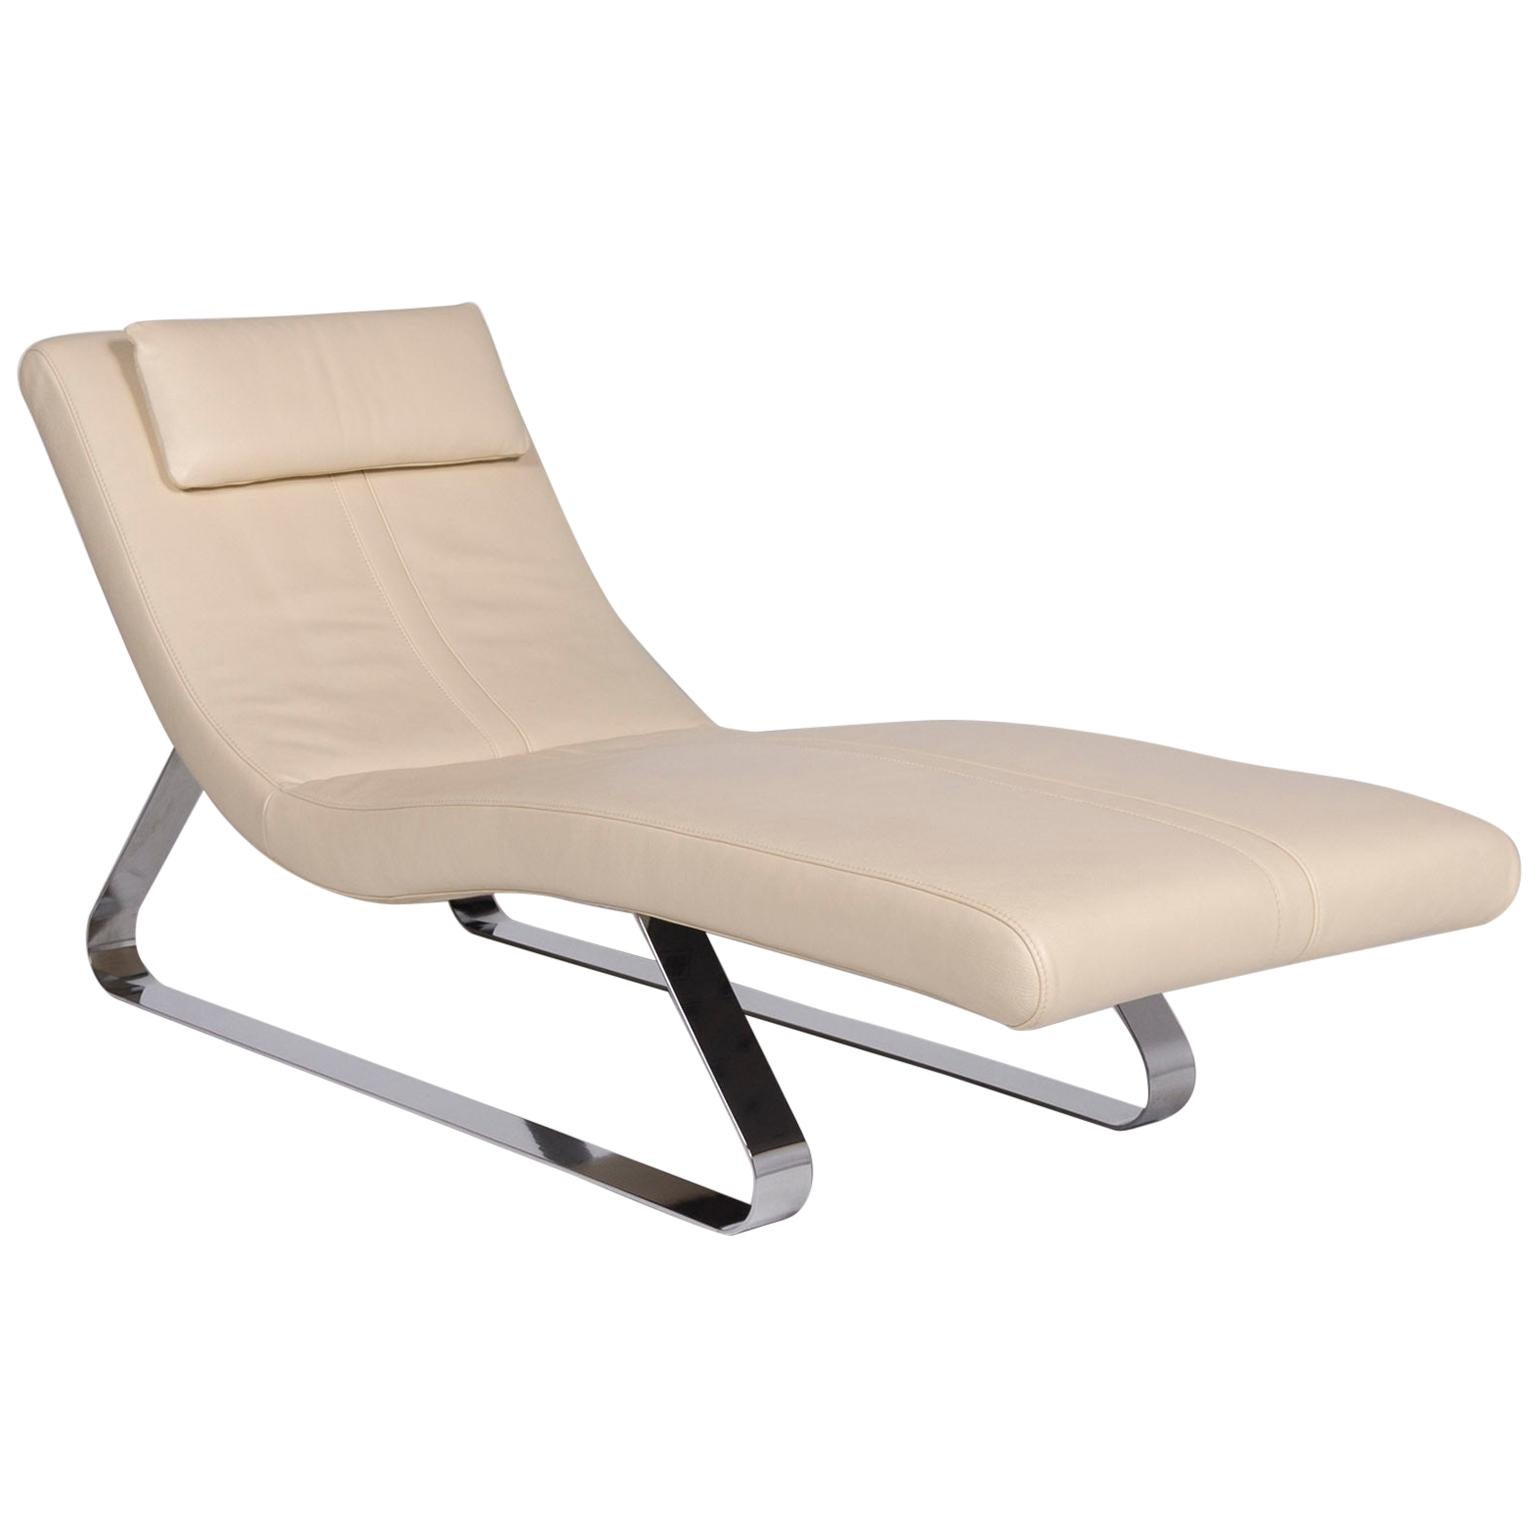 Pattern Ring Leather Lounger Cream Relax Lounger For Sale